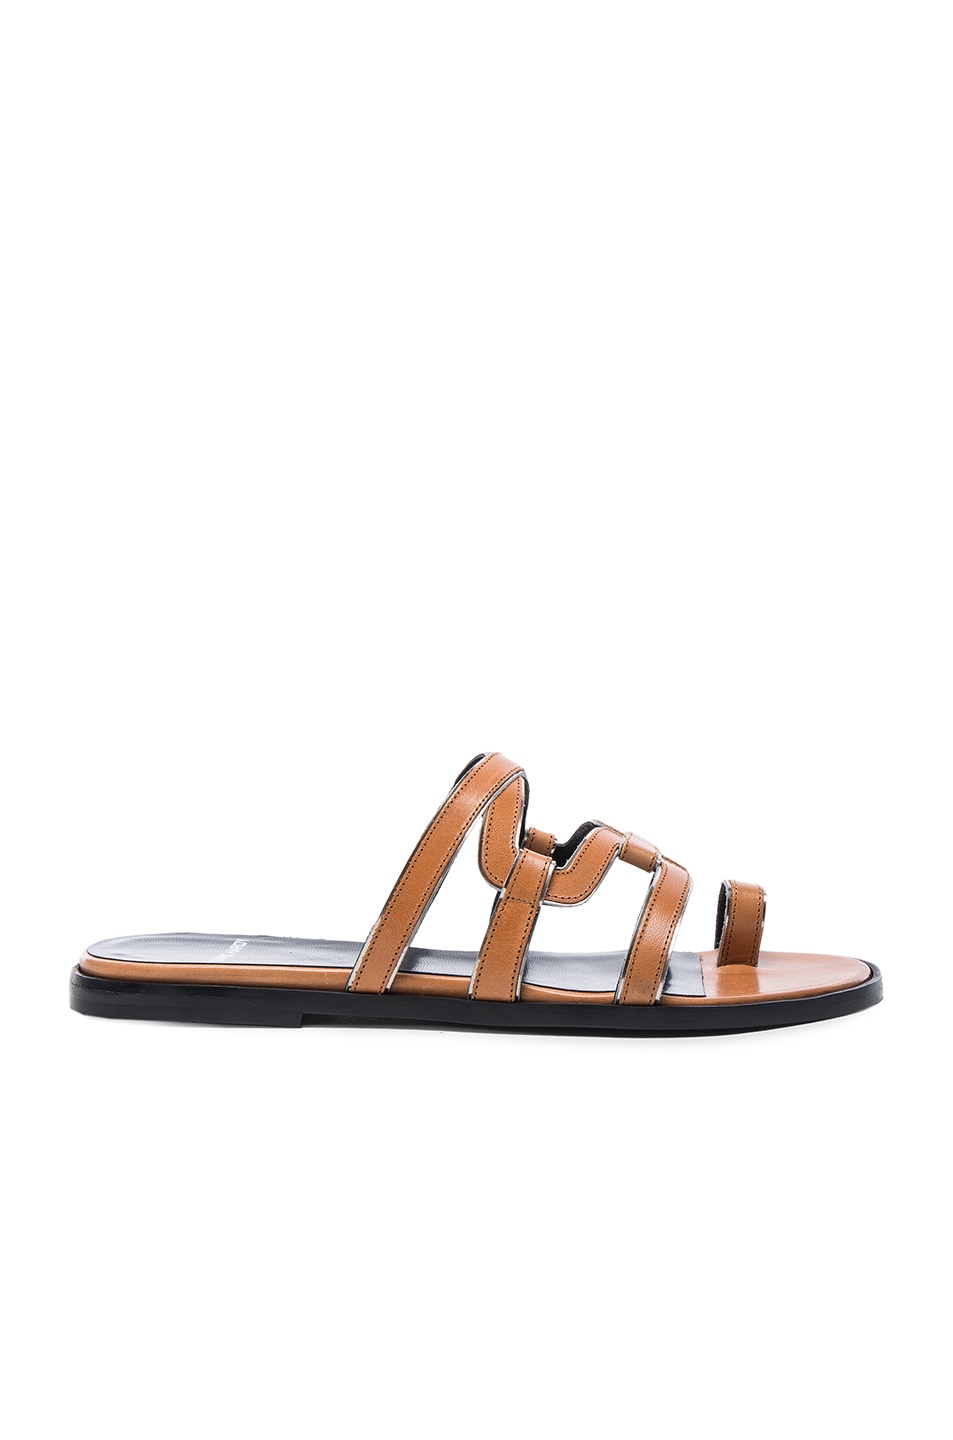 Image 1 of Pierre Hardy Leather Kaliste Sandals in Tan & Gold